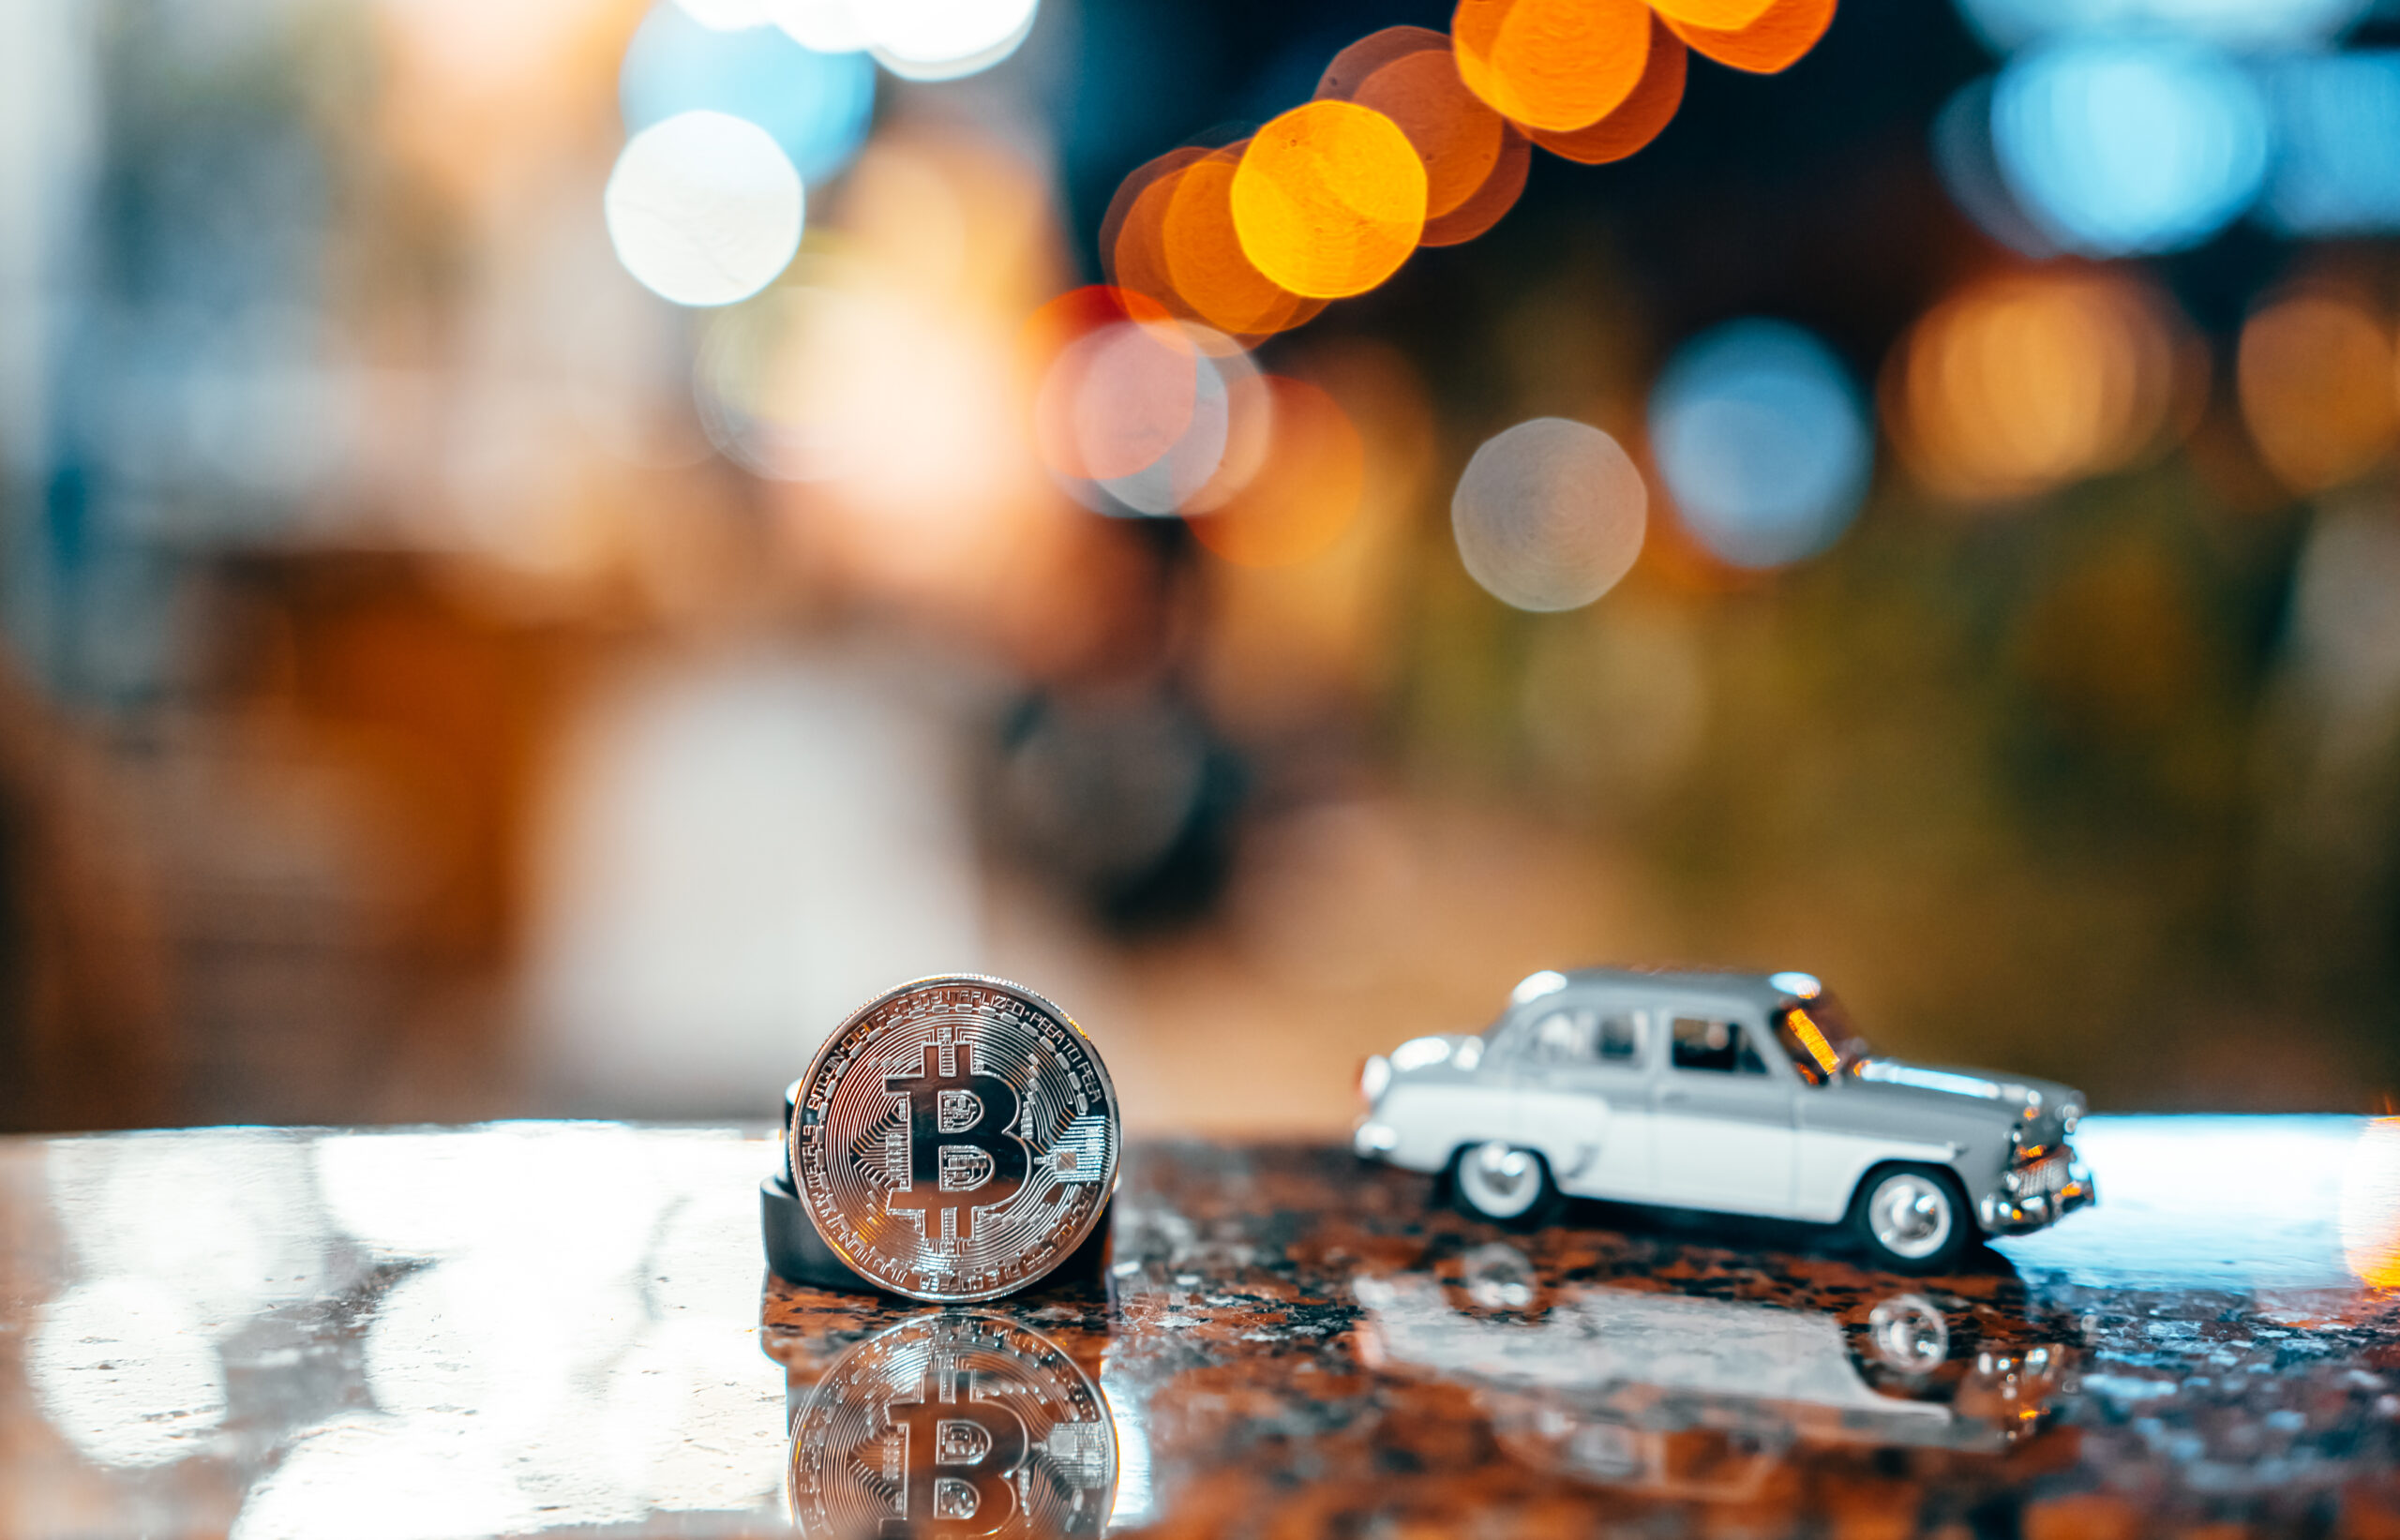 Silver bitcoin and Moskvich 401 on the table, glowing background